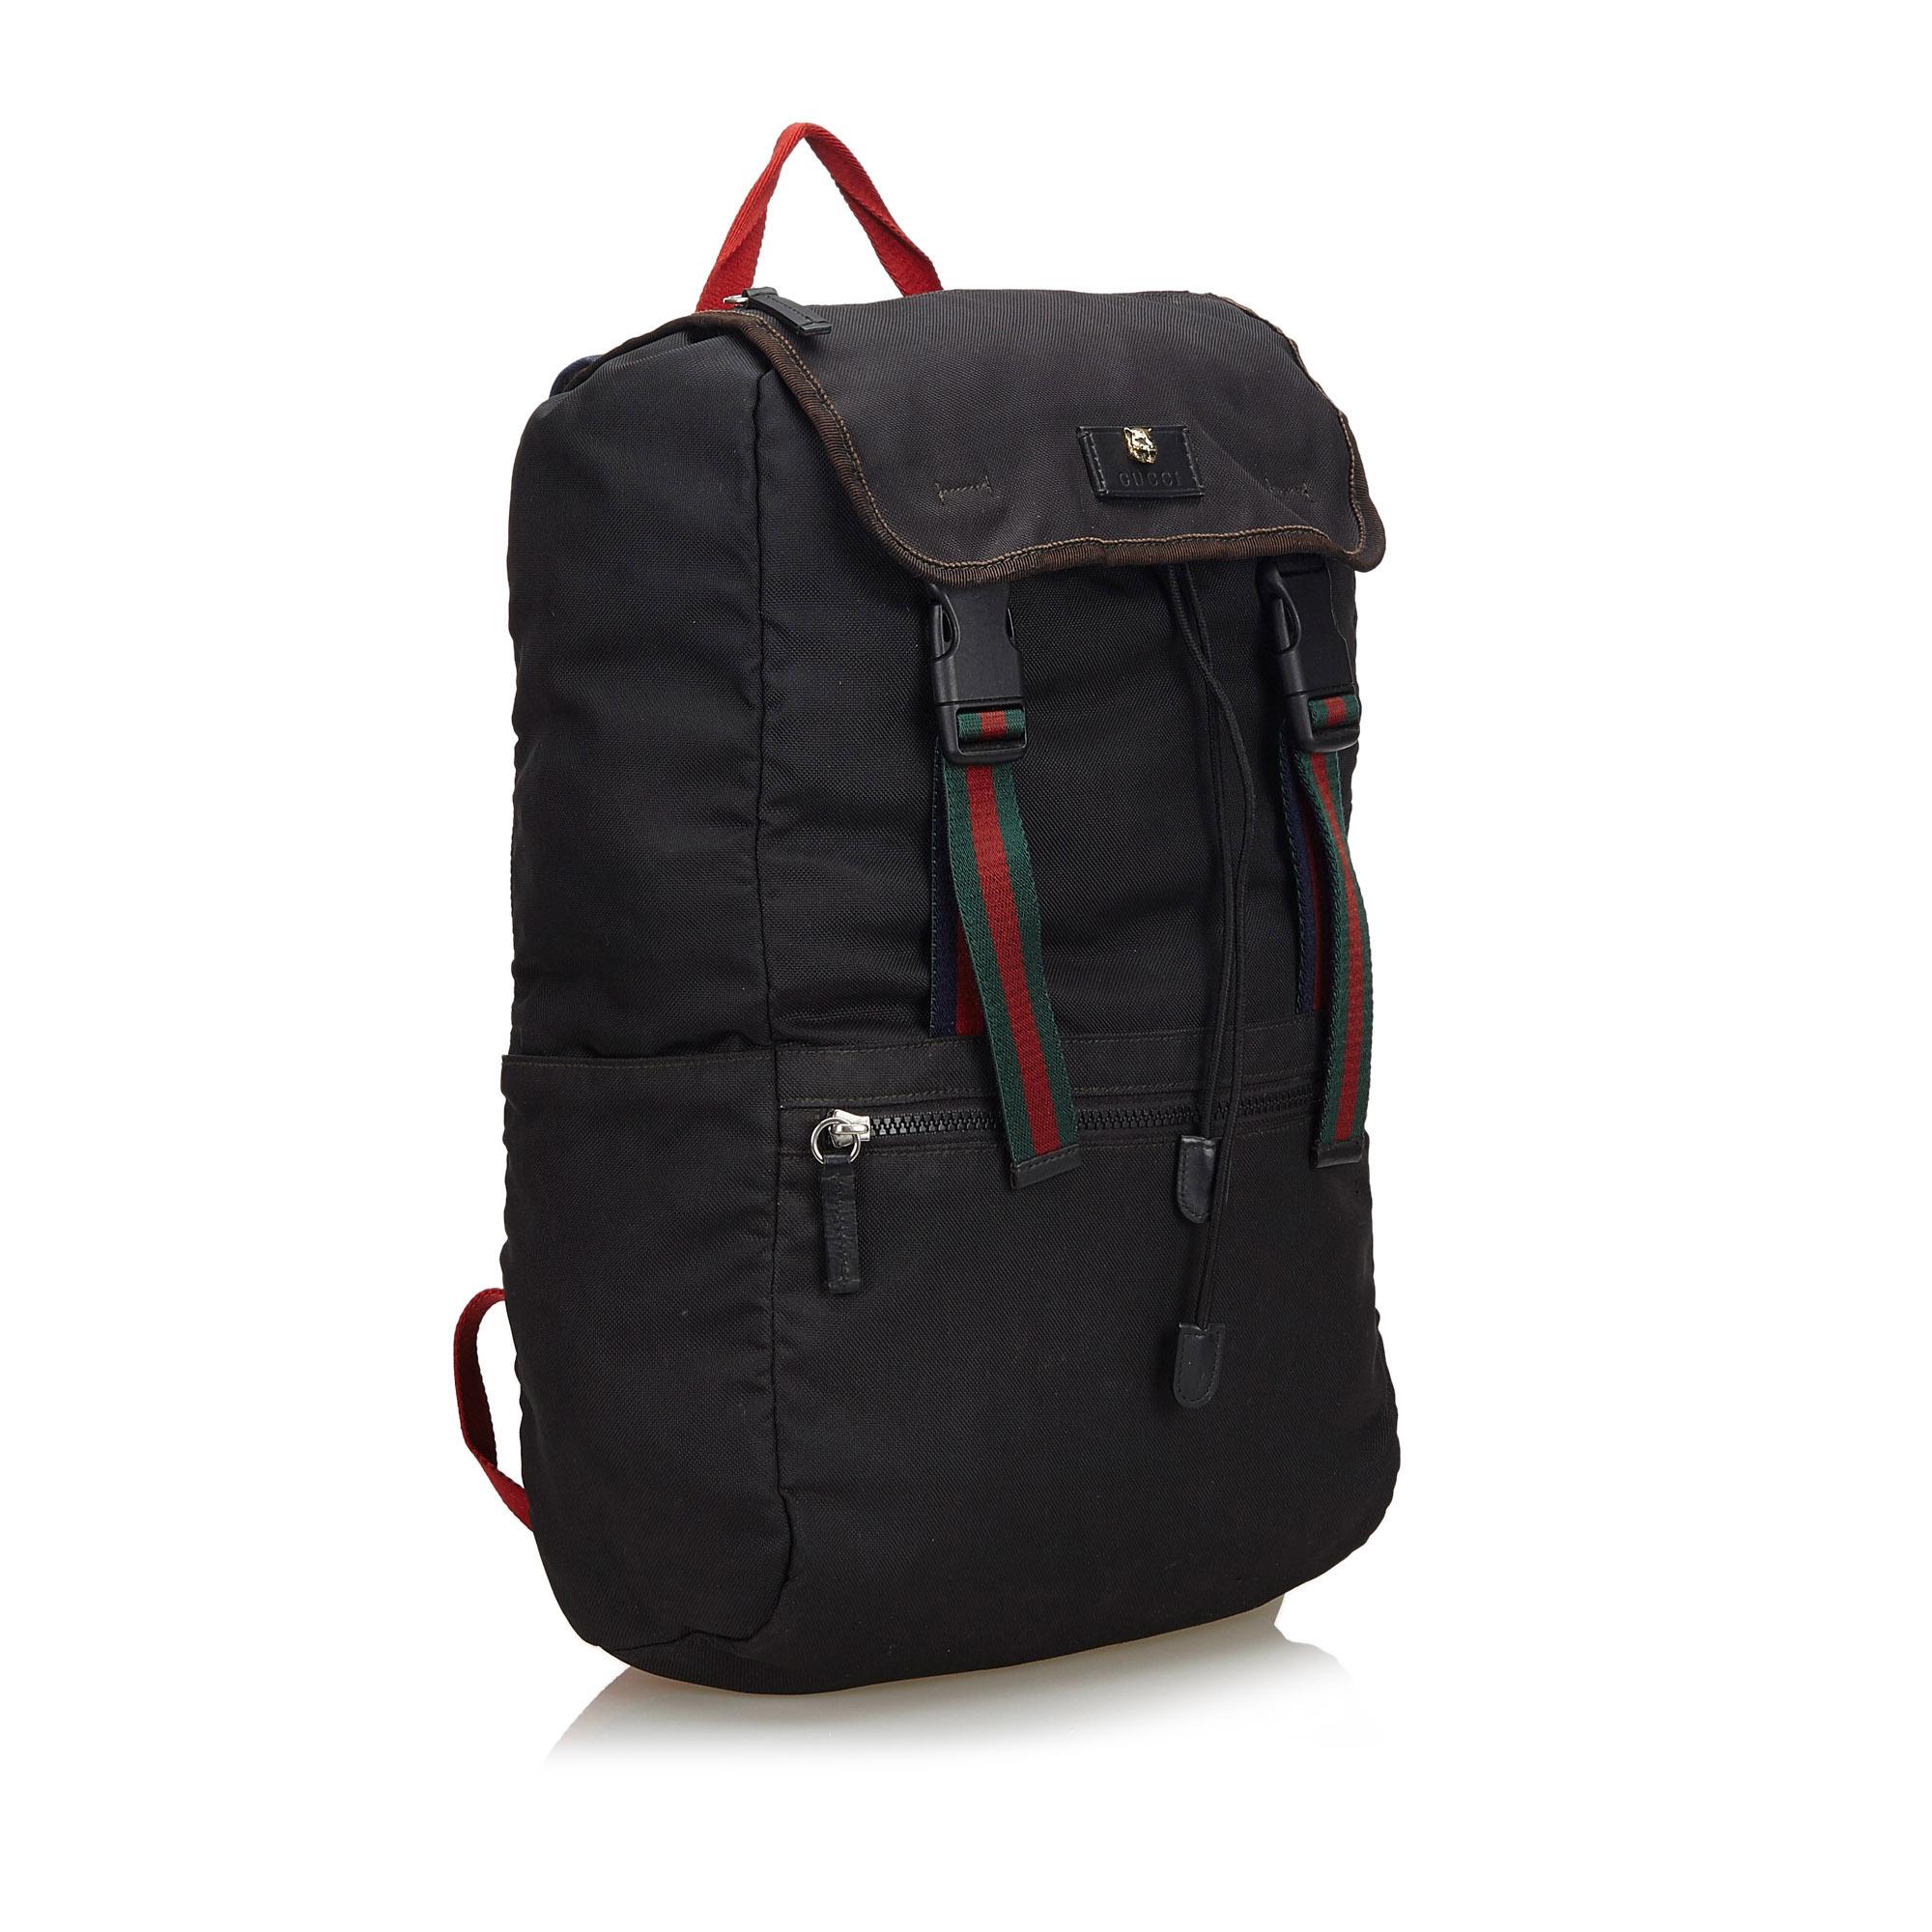 This backpack features a canvas body, a flat top handle, a flat adjustable shoulder strap, a top flap with buckle closures, a drawstring closure, exterior zip and slip pockets, and an interior zip pocket. It carries as B condition